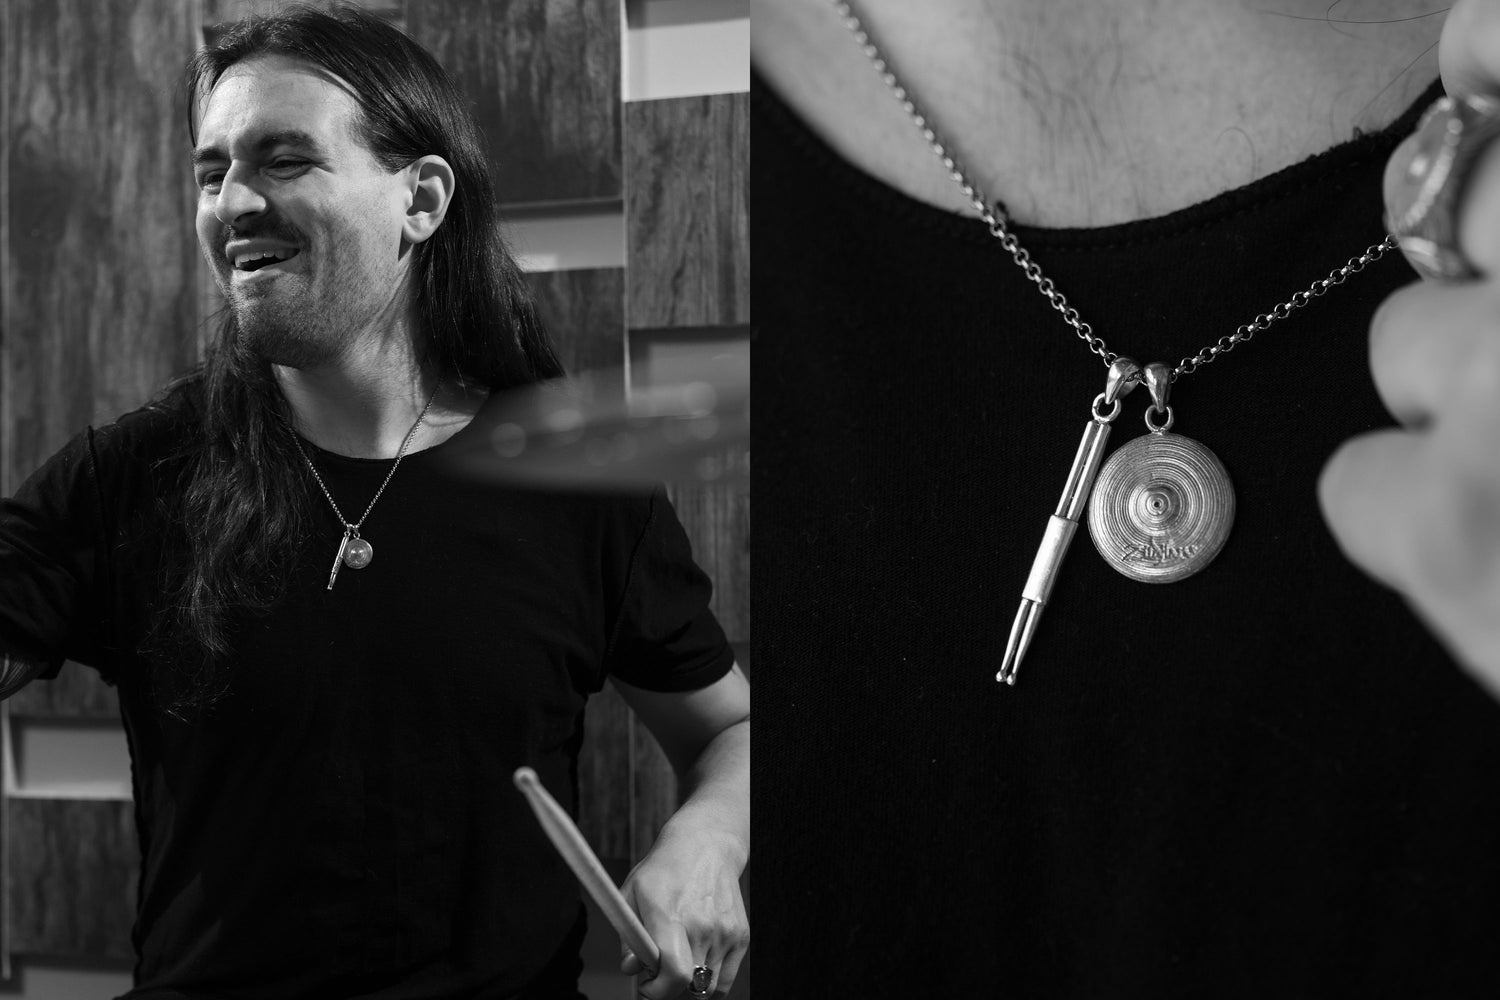 Key x Zildjian Handcrafted Sterling Silver Men's Pendant with Brass  Details – Clocks and Colours